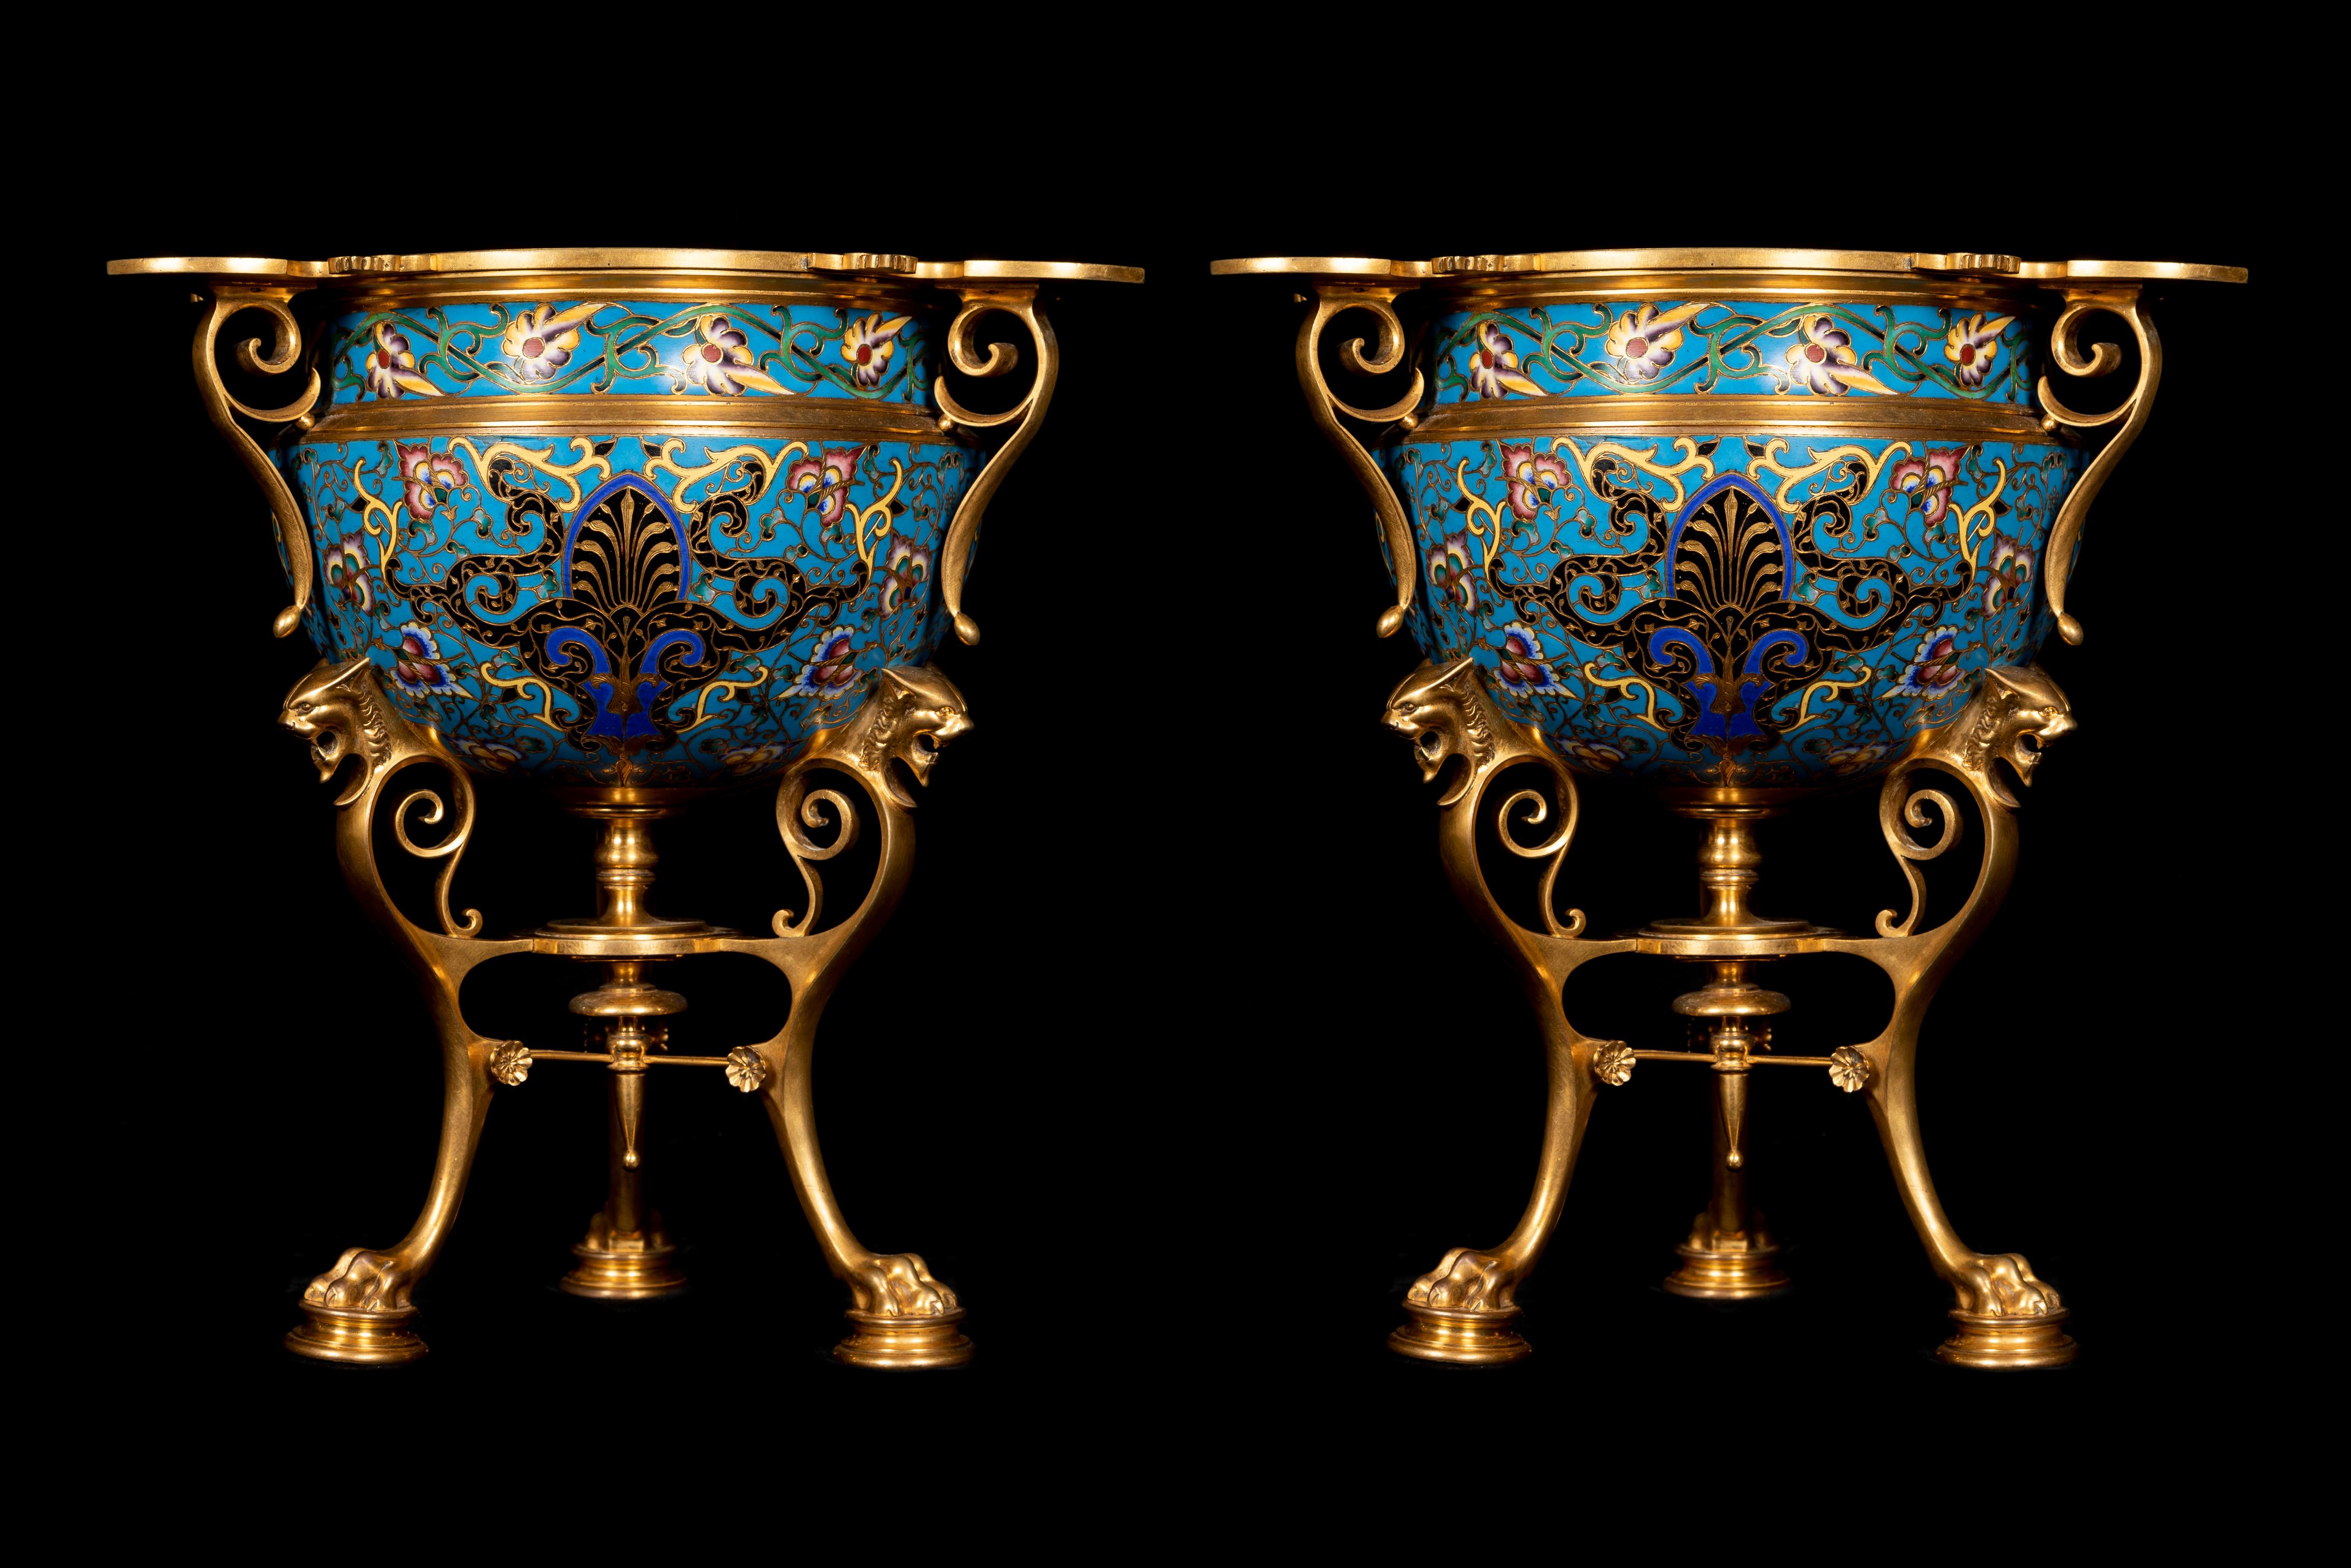 A Pair of extremely unique Antique Ferdinand Barbedienne Figural ormolu bronze and champleve enamel neoclassical jardiniers /centerpieces of exquisite craftsmanship  signed by Ferdinand Barbedienne. These museum quality blue turquoise enamel